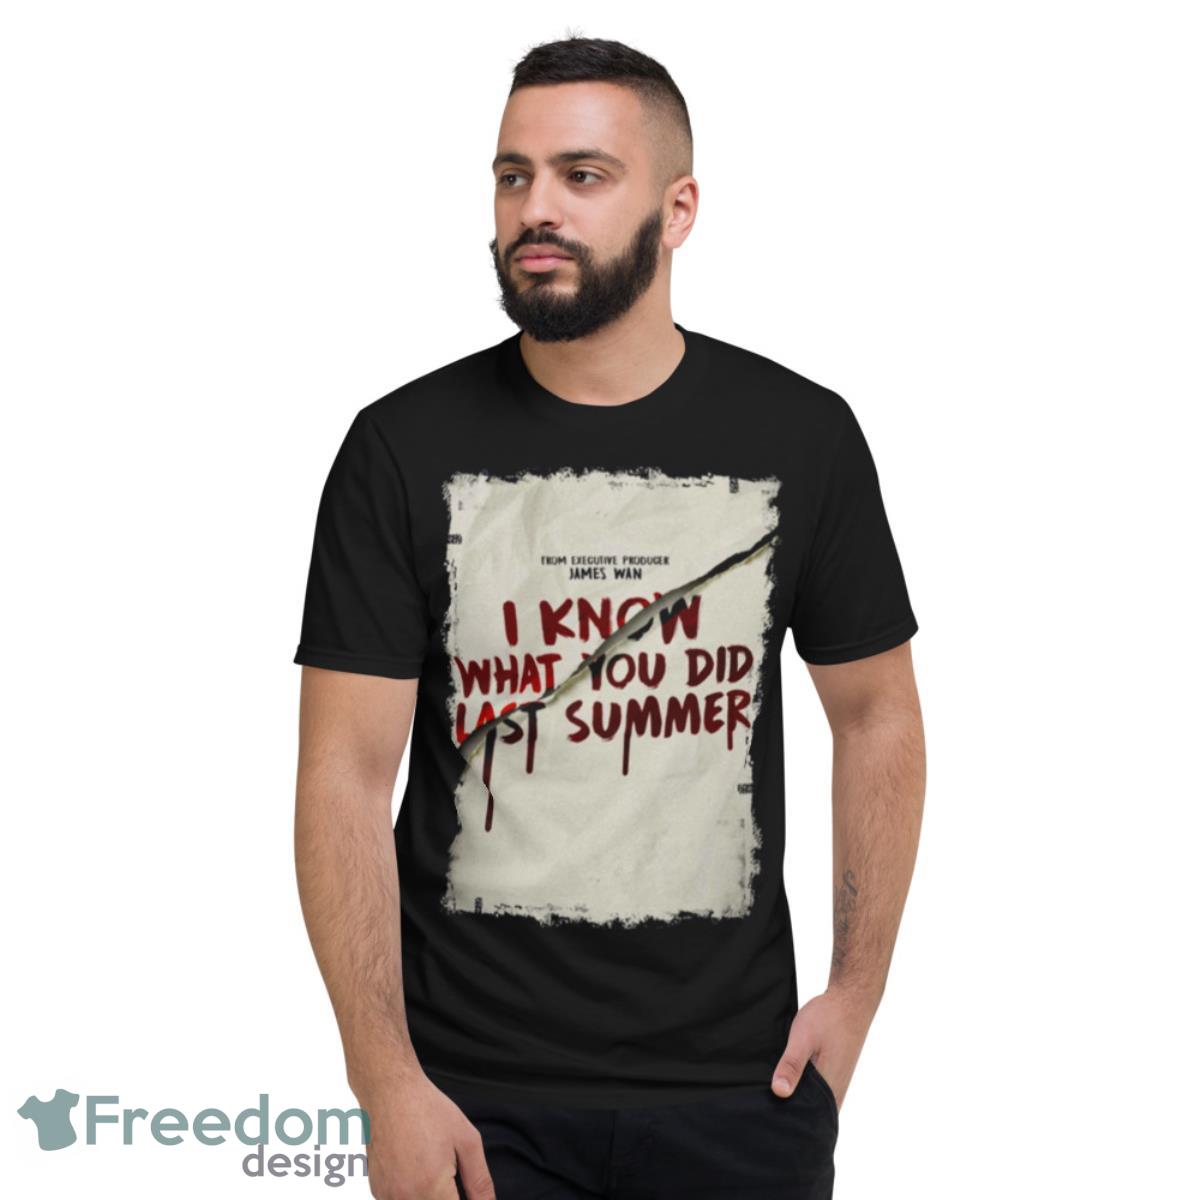 James Wan I Know What You Did Last Summer shirt